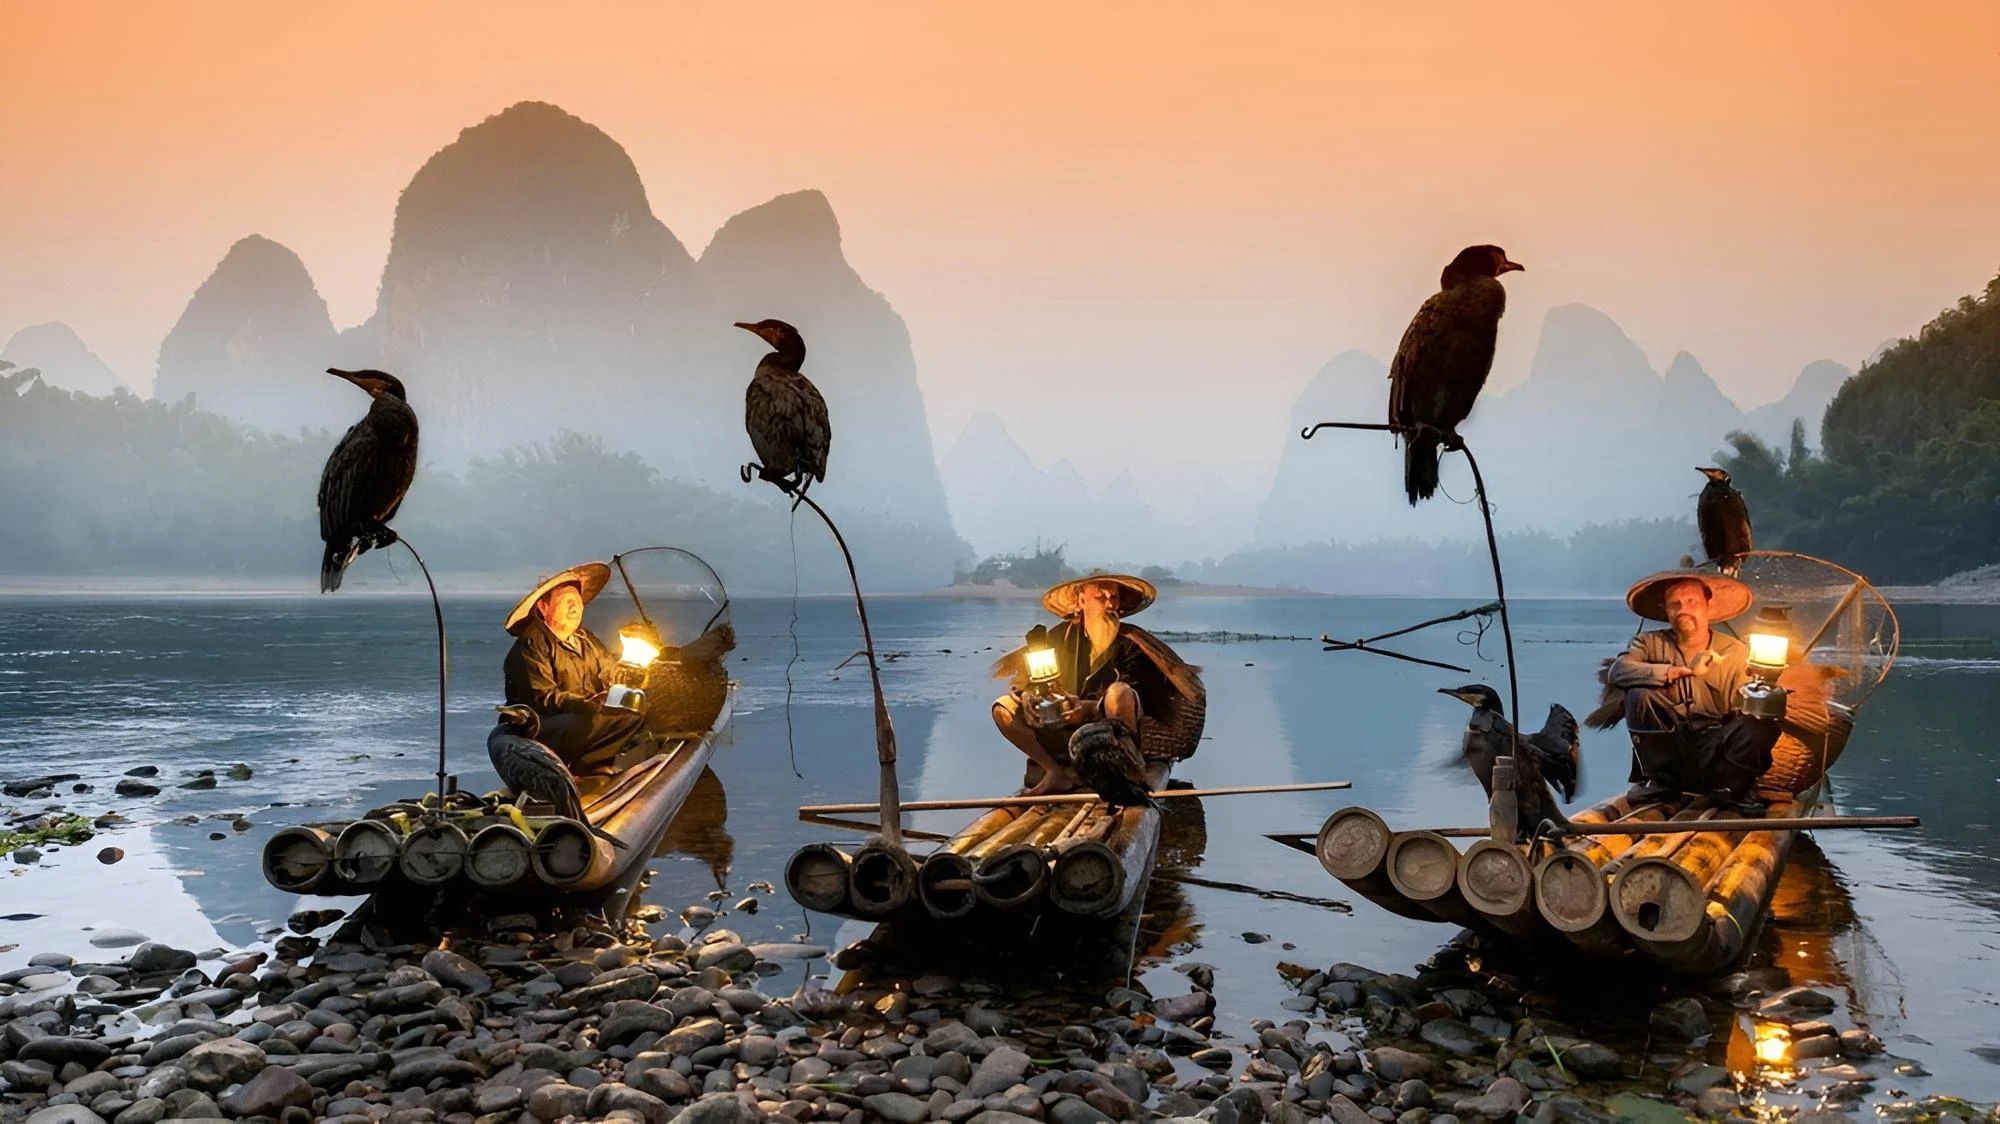 What is the essence of Chinese fishing with cormorants?